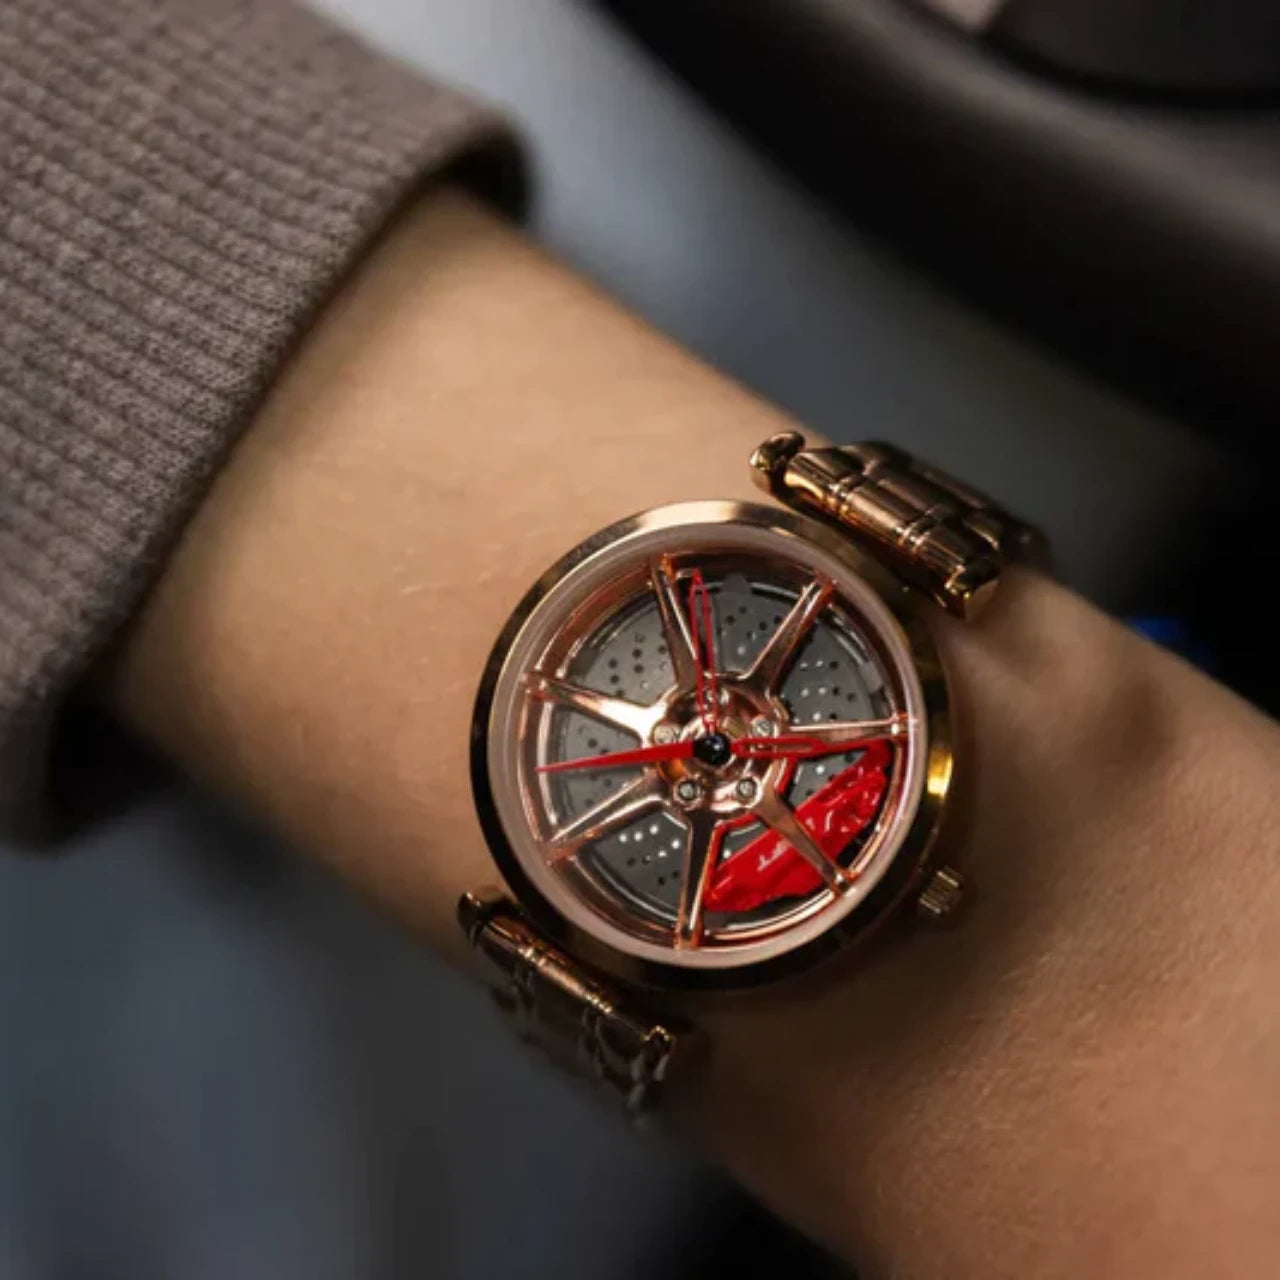 Elevate your fashion with our rose ladies' Rim Watch! Meticulously crafted by a German startup, these precision watches showcase innovative design. Designed to captivate motorsport, tuning, and auto enthusiasts. #id_46744378966346